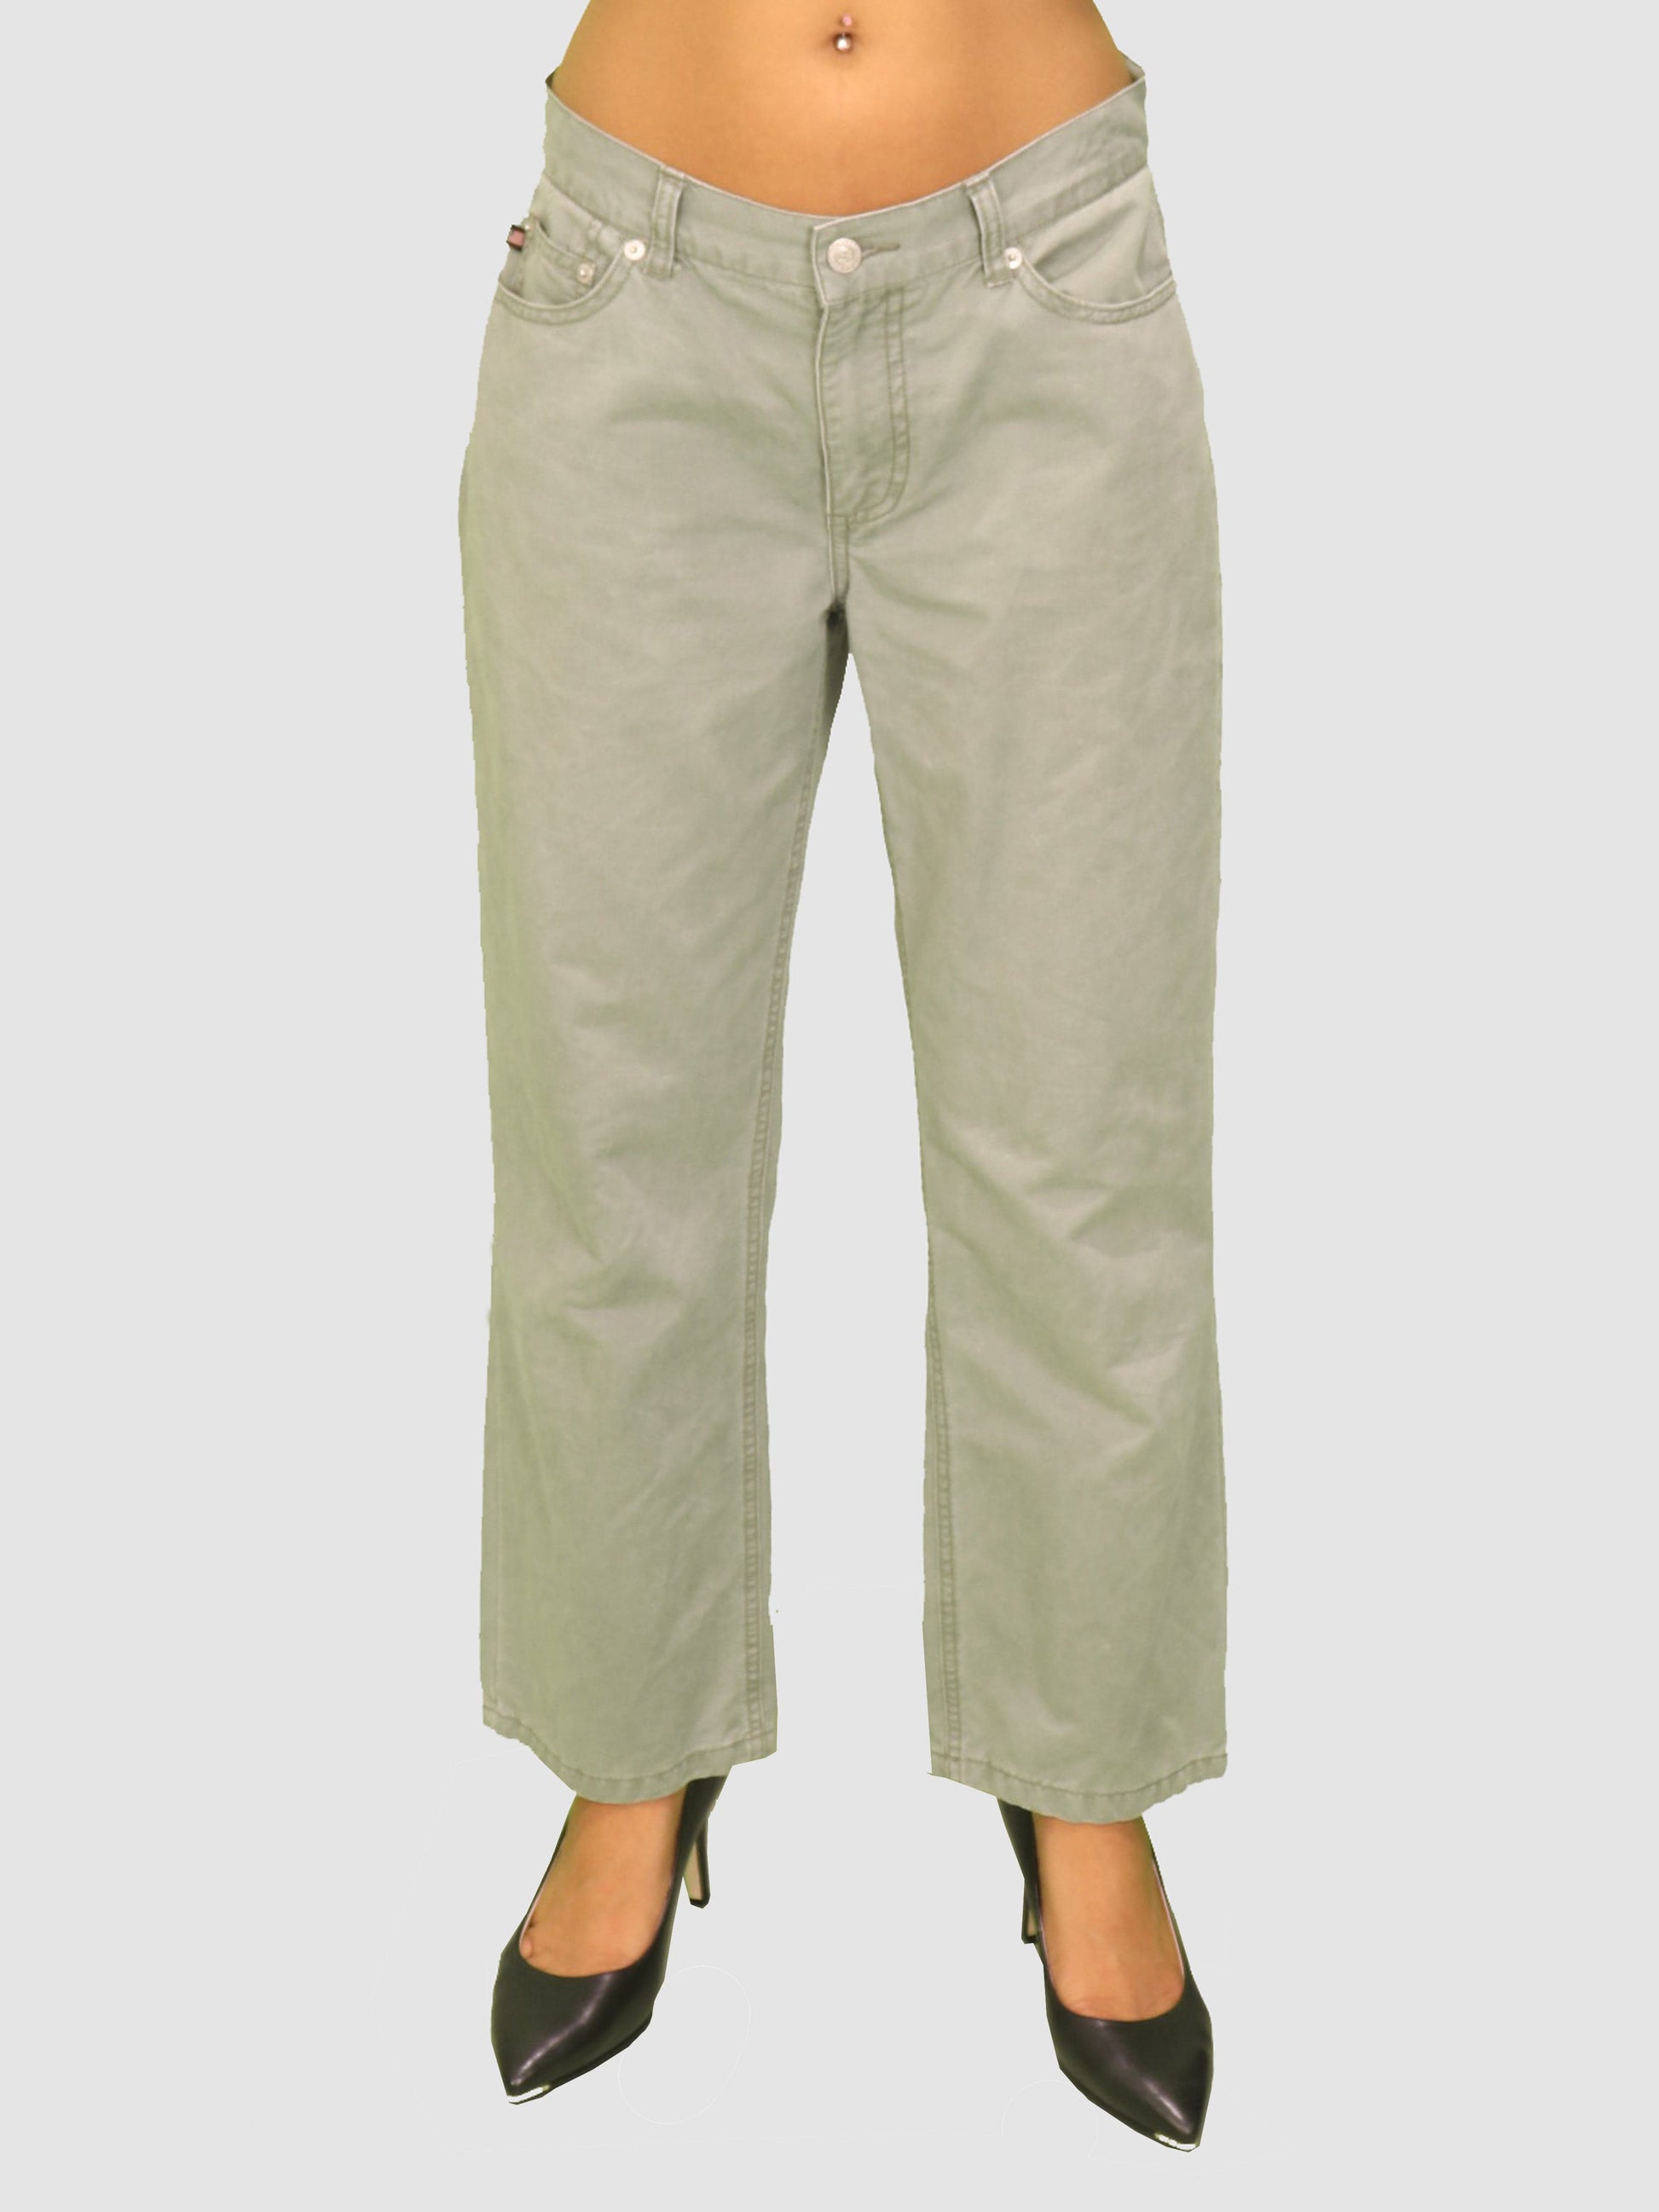 Polo Jeans Company Womens Bottoms Small / Light Olive Pants